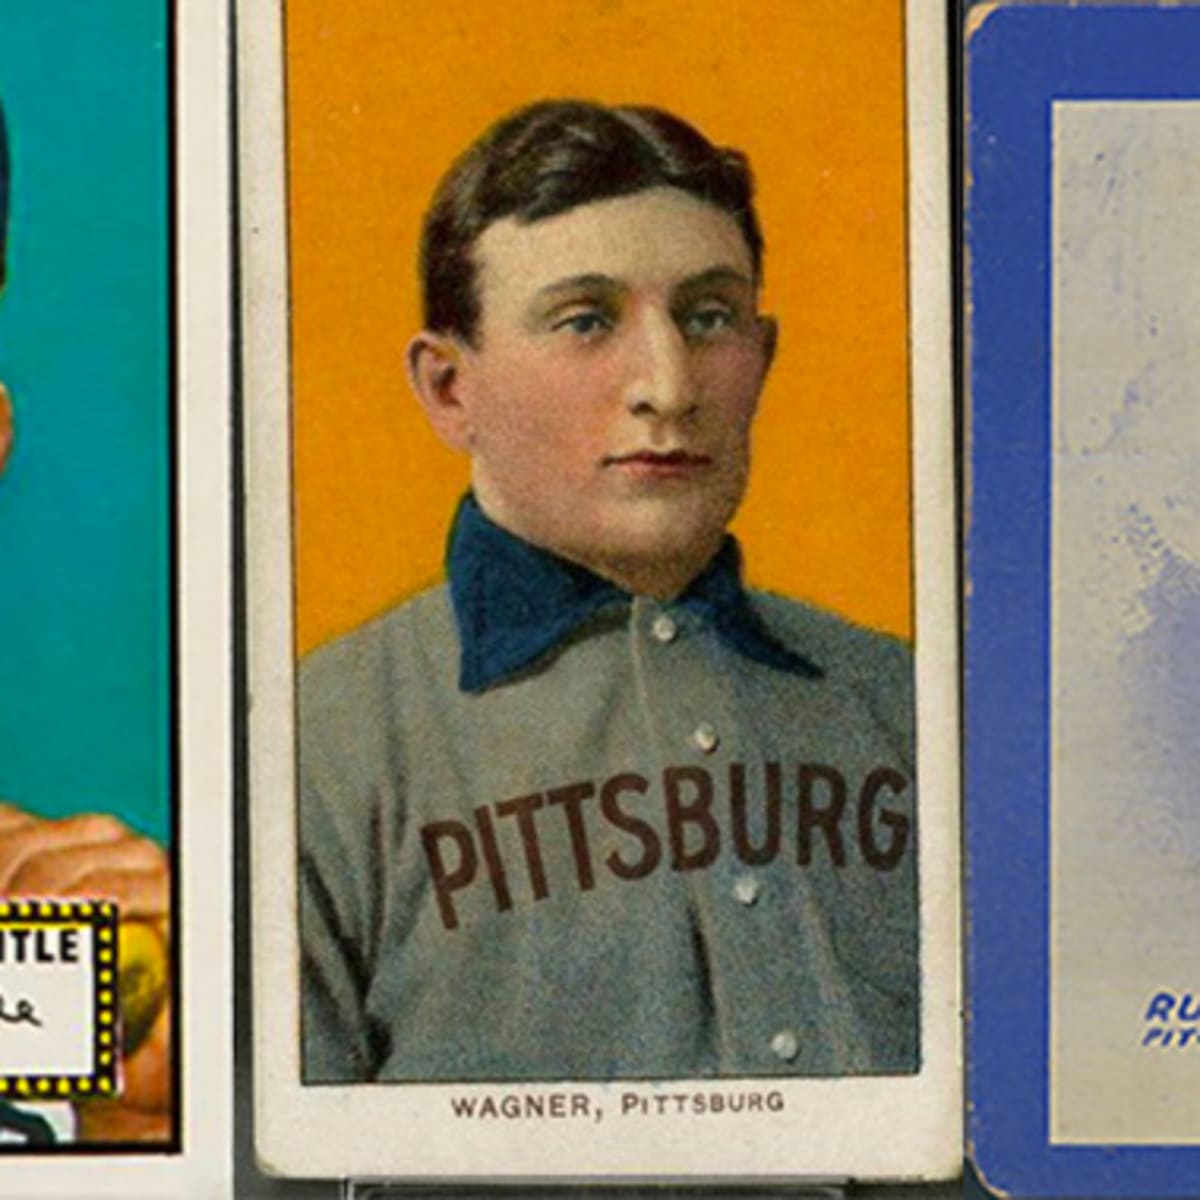 8 Most Valuable Baseball Cards Ever   AthlonSports.com   Expert ...